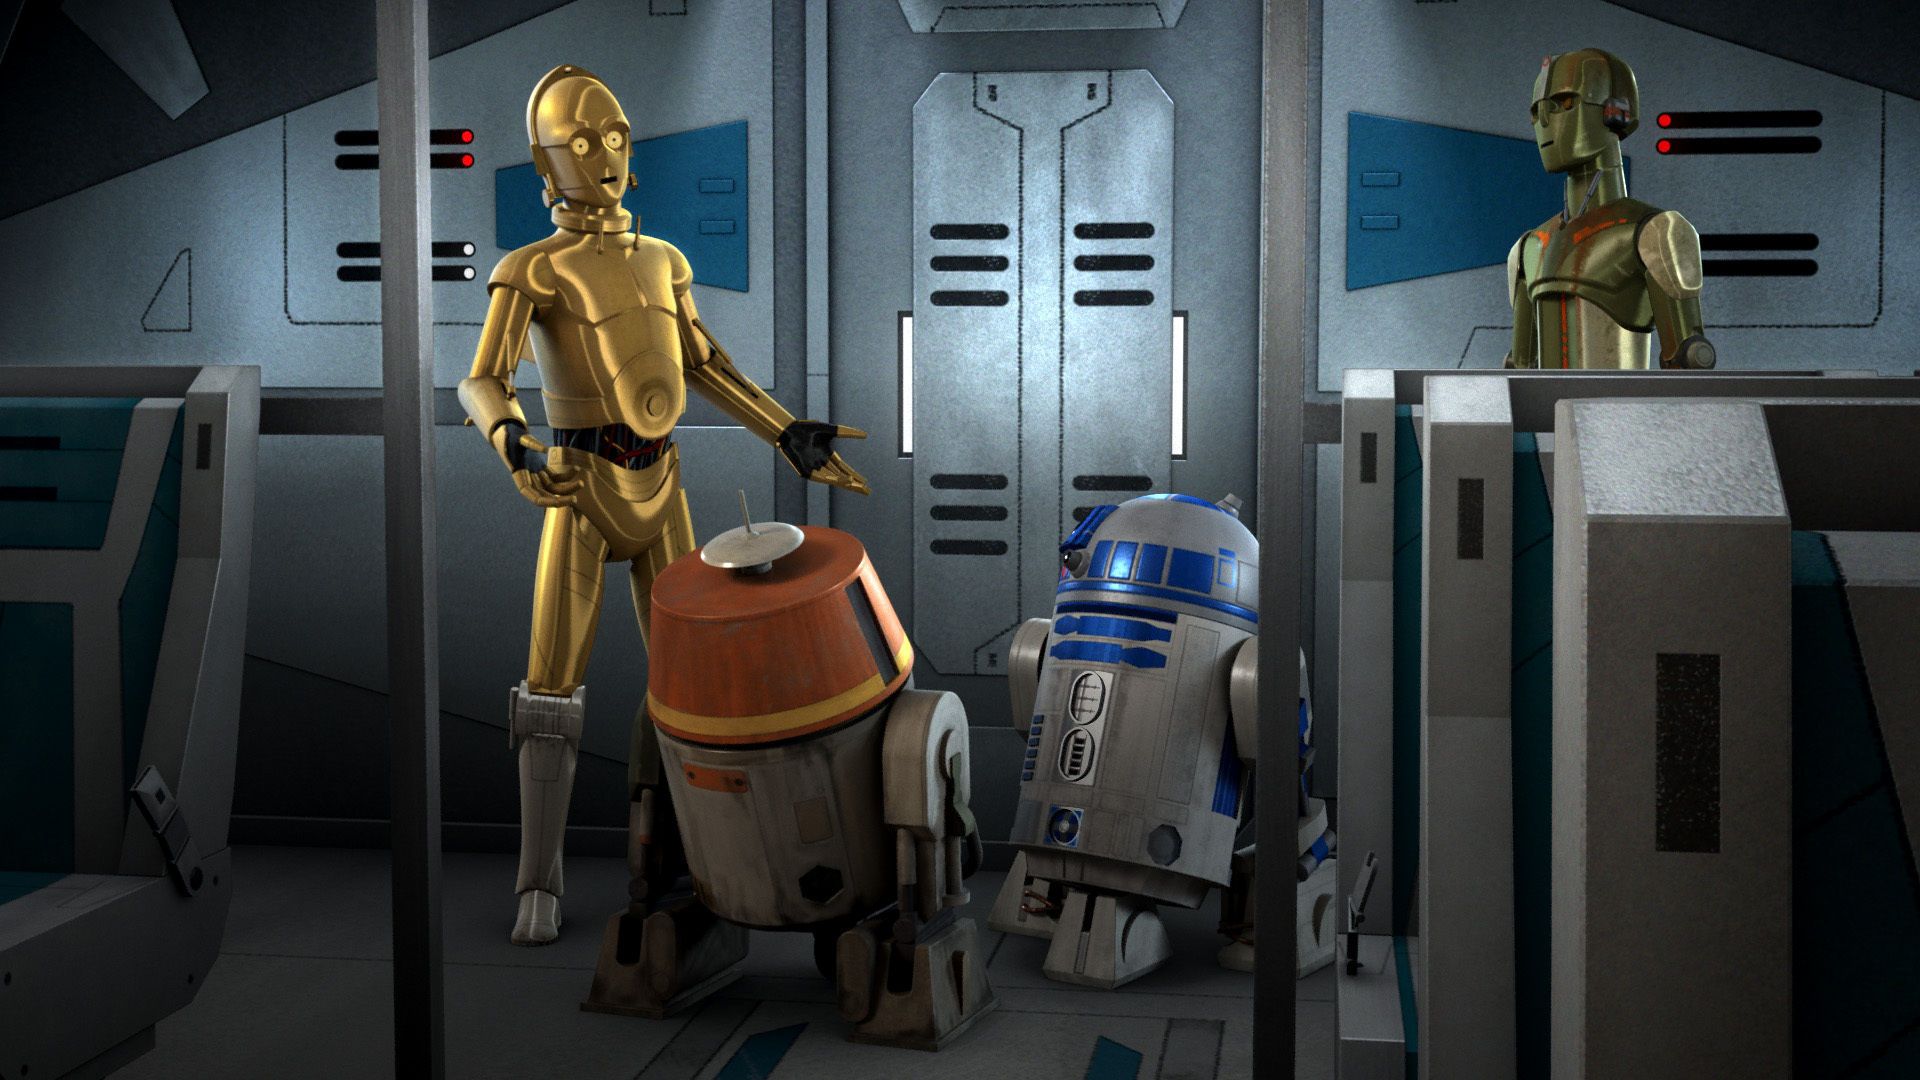 R2-D2 and C3PO in Star Wars Rebels.